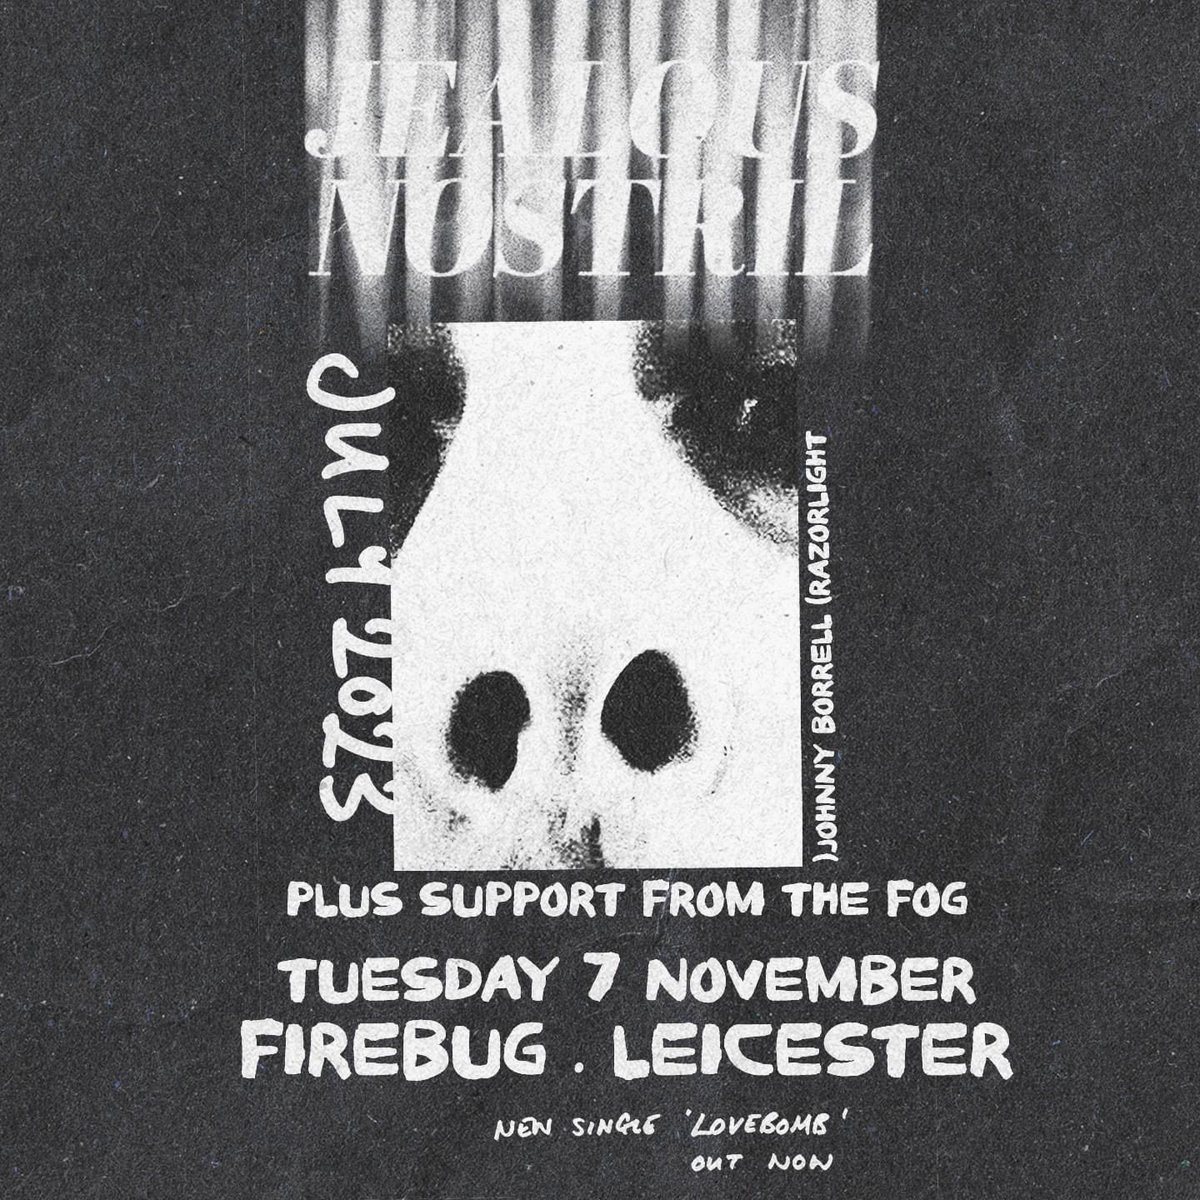 Tomorrow at @FirebugBar we have @JealousNostril with support from The Fog. Come see Johnny Borrell from #razorlight’s new side project. #Leicester